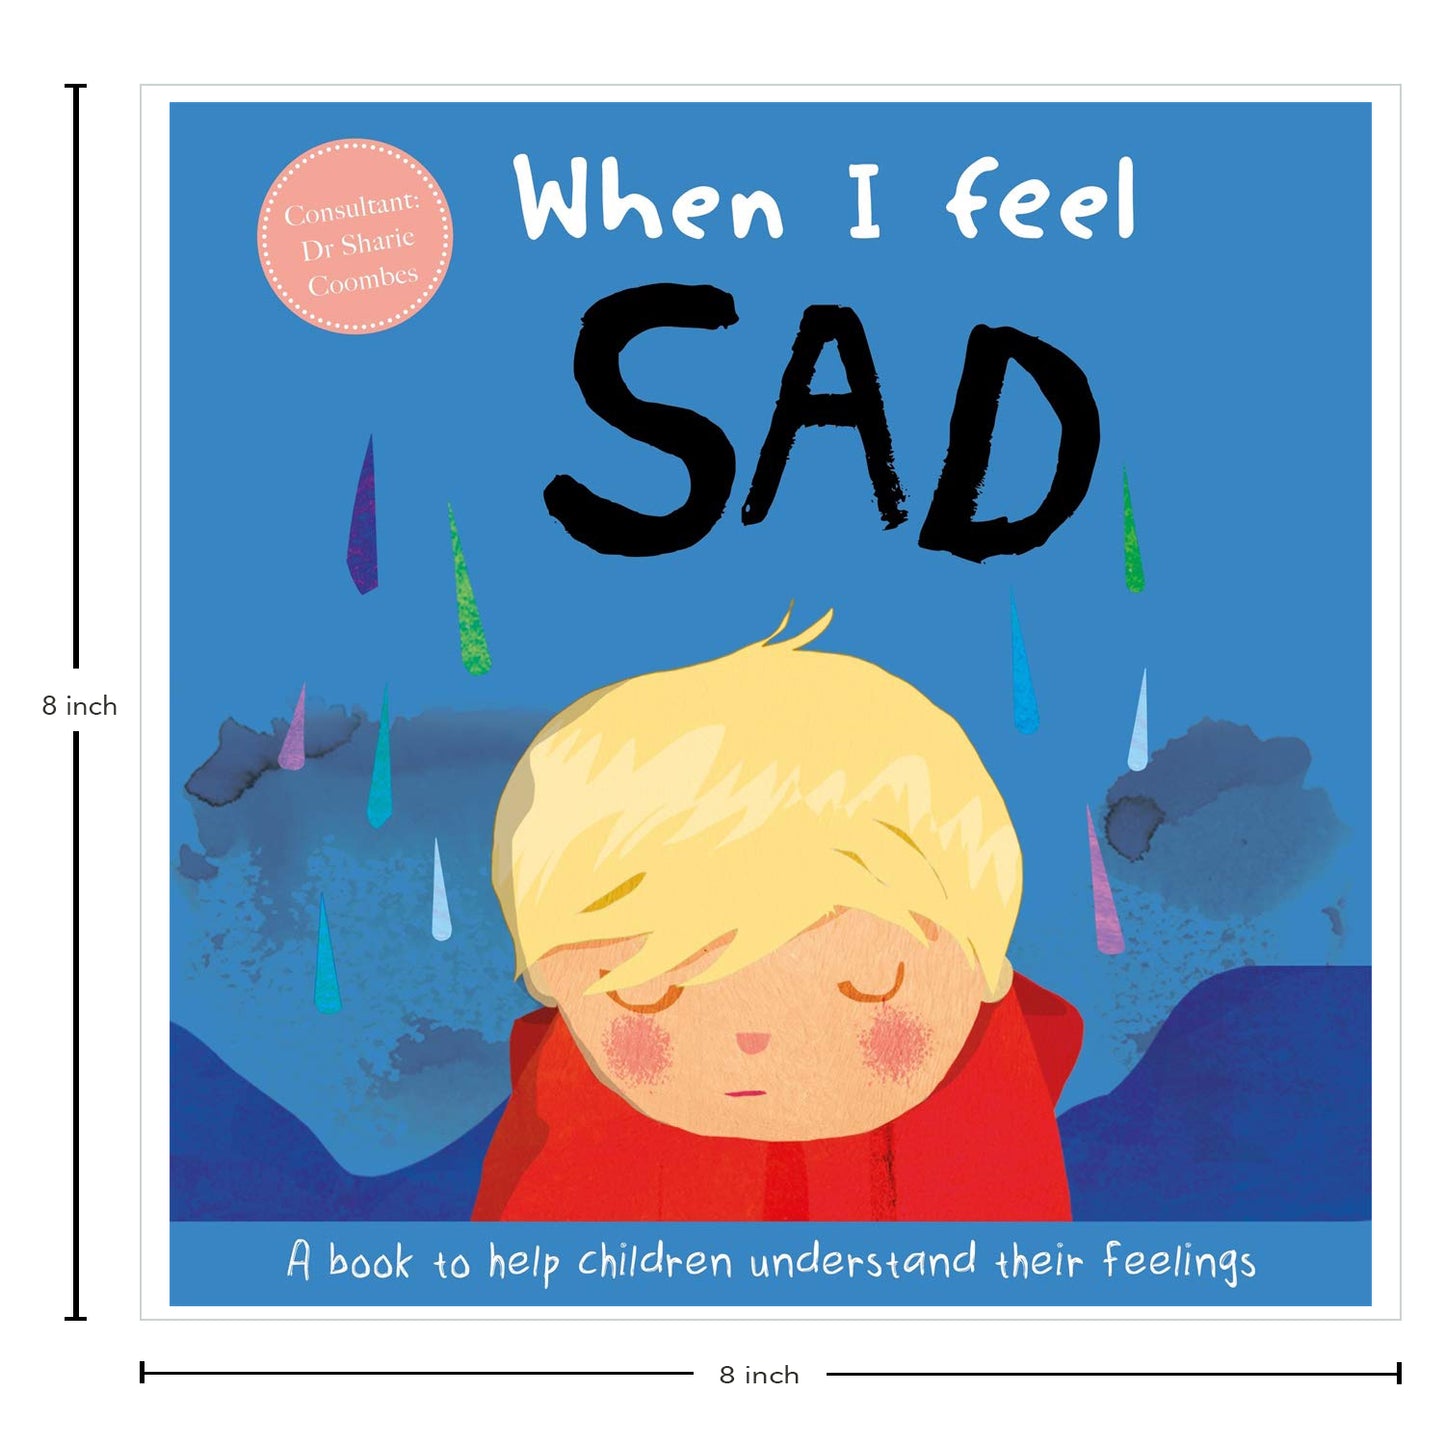 When I Feel Sad (A Children's Book about Emotions) [Hardcover] Coombes, Dr Sharie